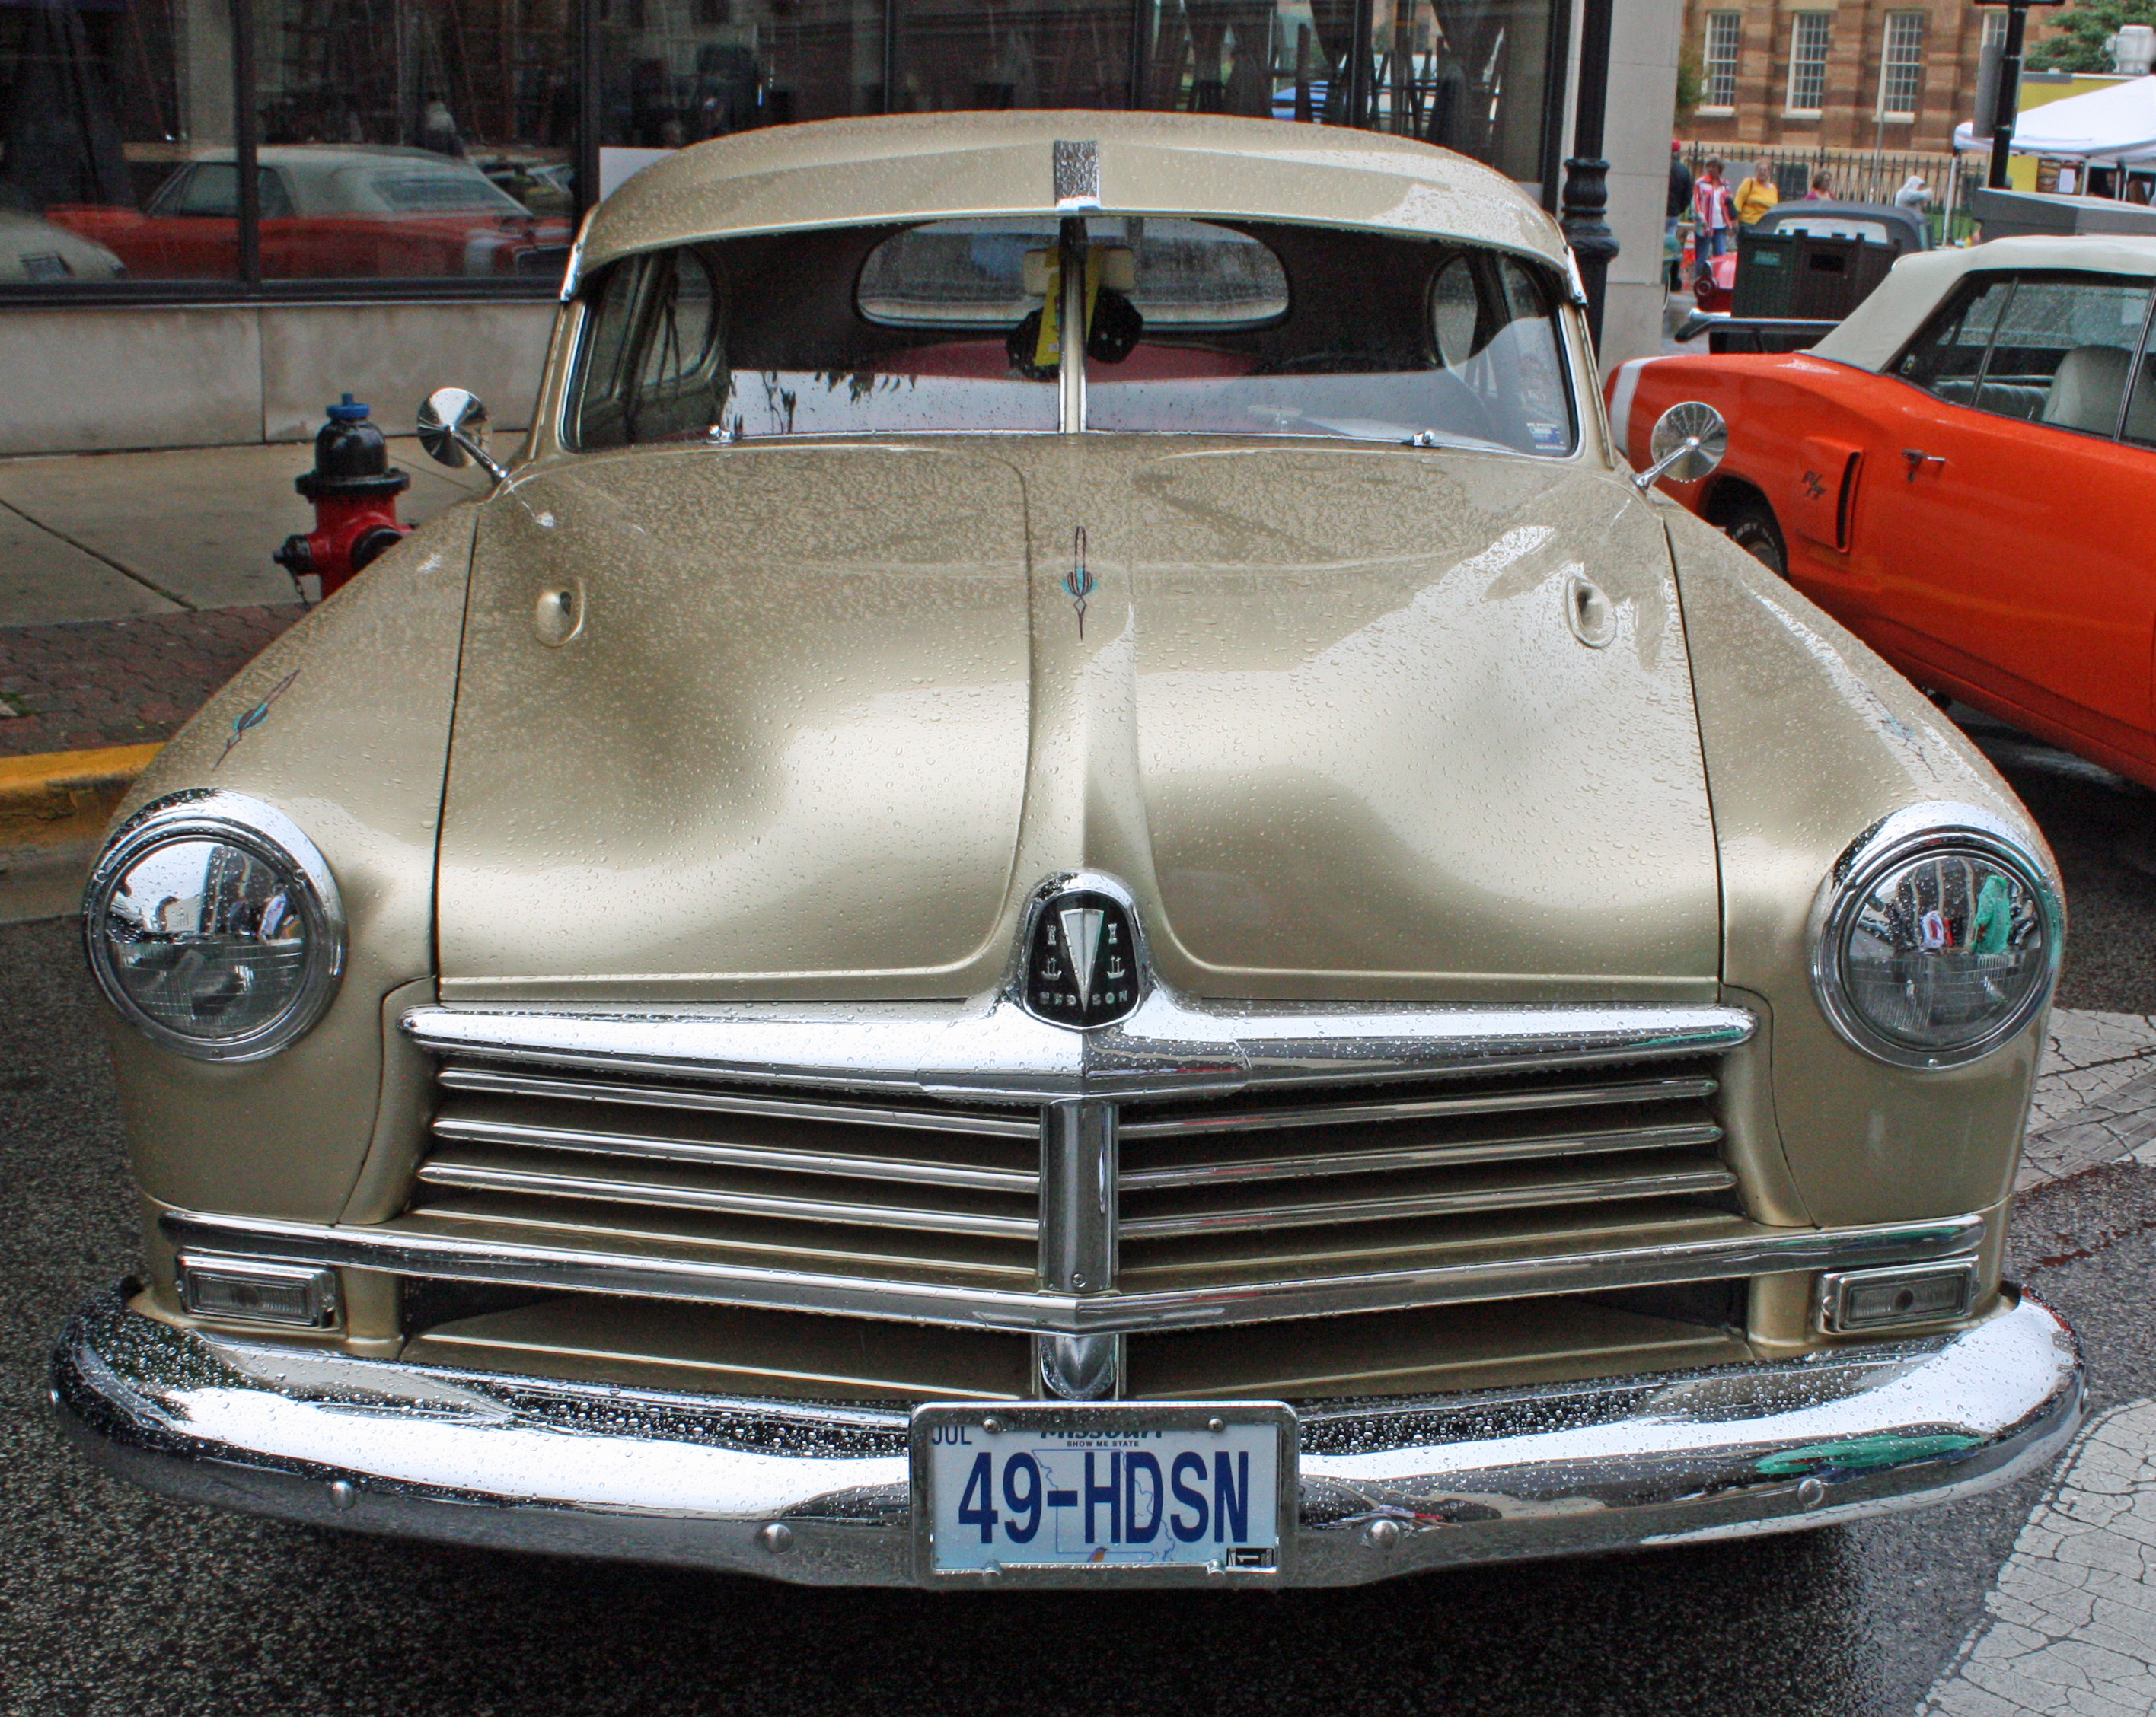 1949 Hudson Super Club Coupe (3 of 10) | Flickr - Photo Sharing!